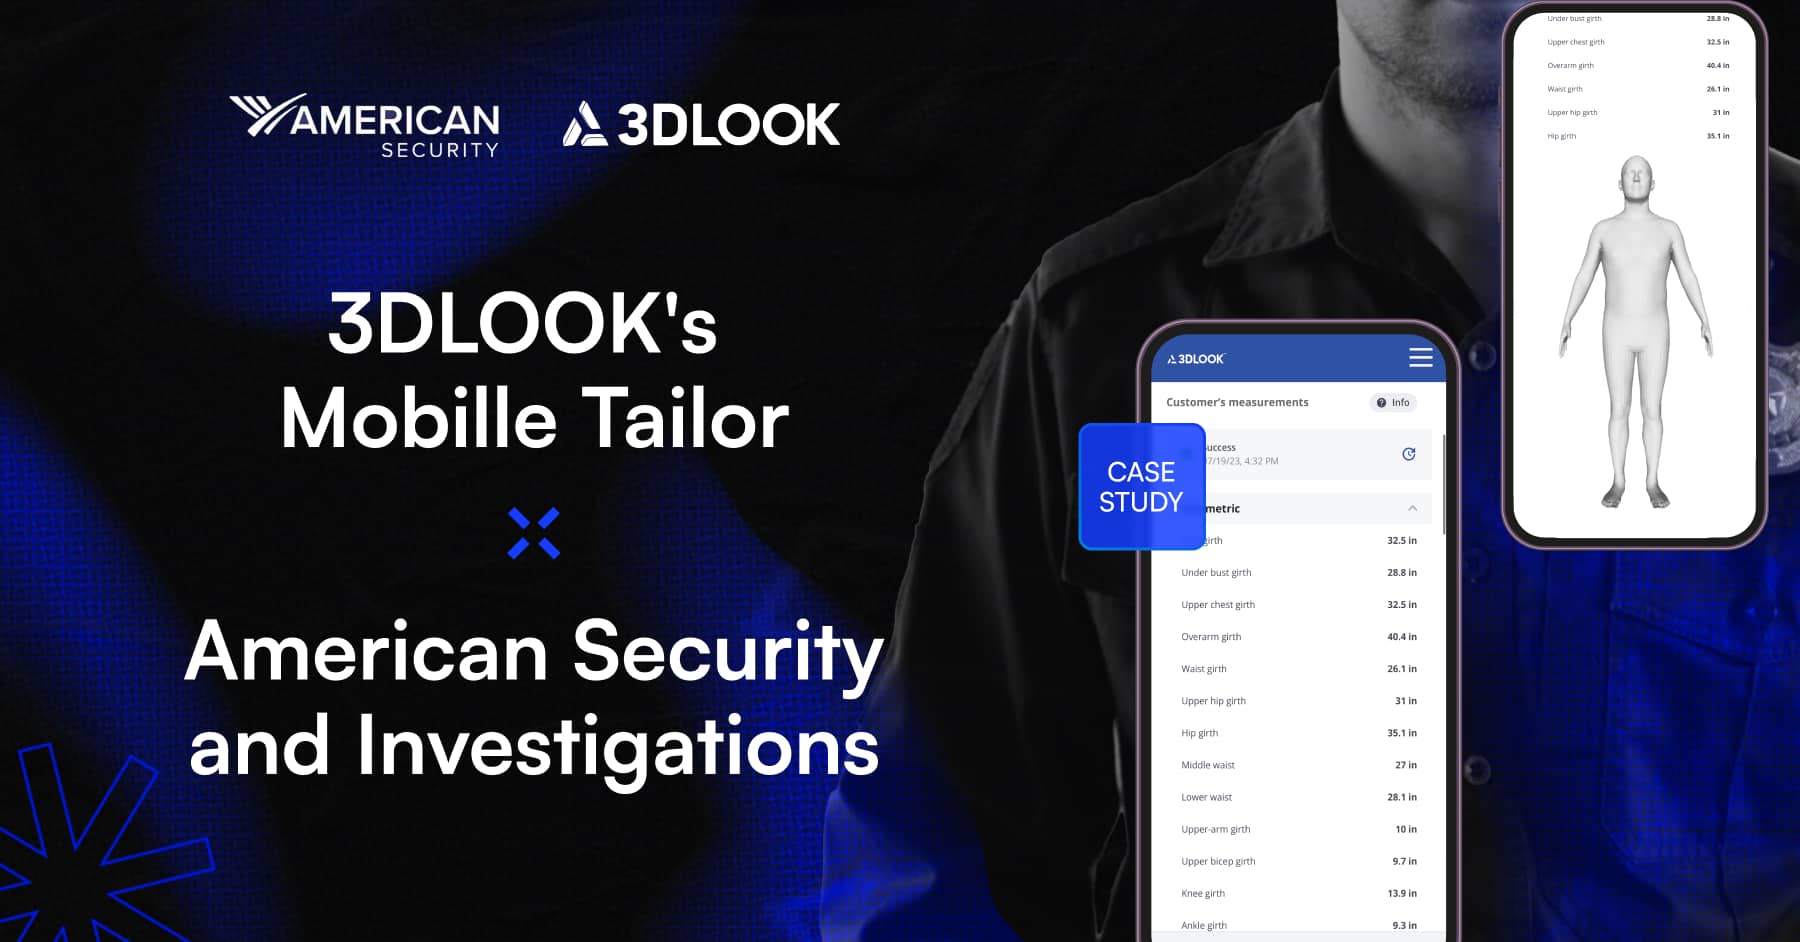 3dlook's mobile tailor ensures uniform sizing and accuracy for American security and investigations.